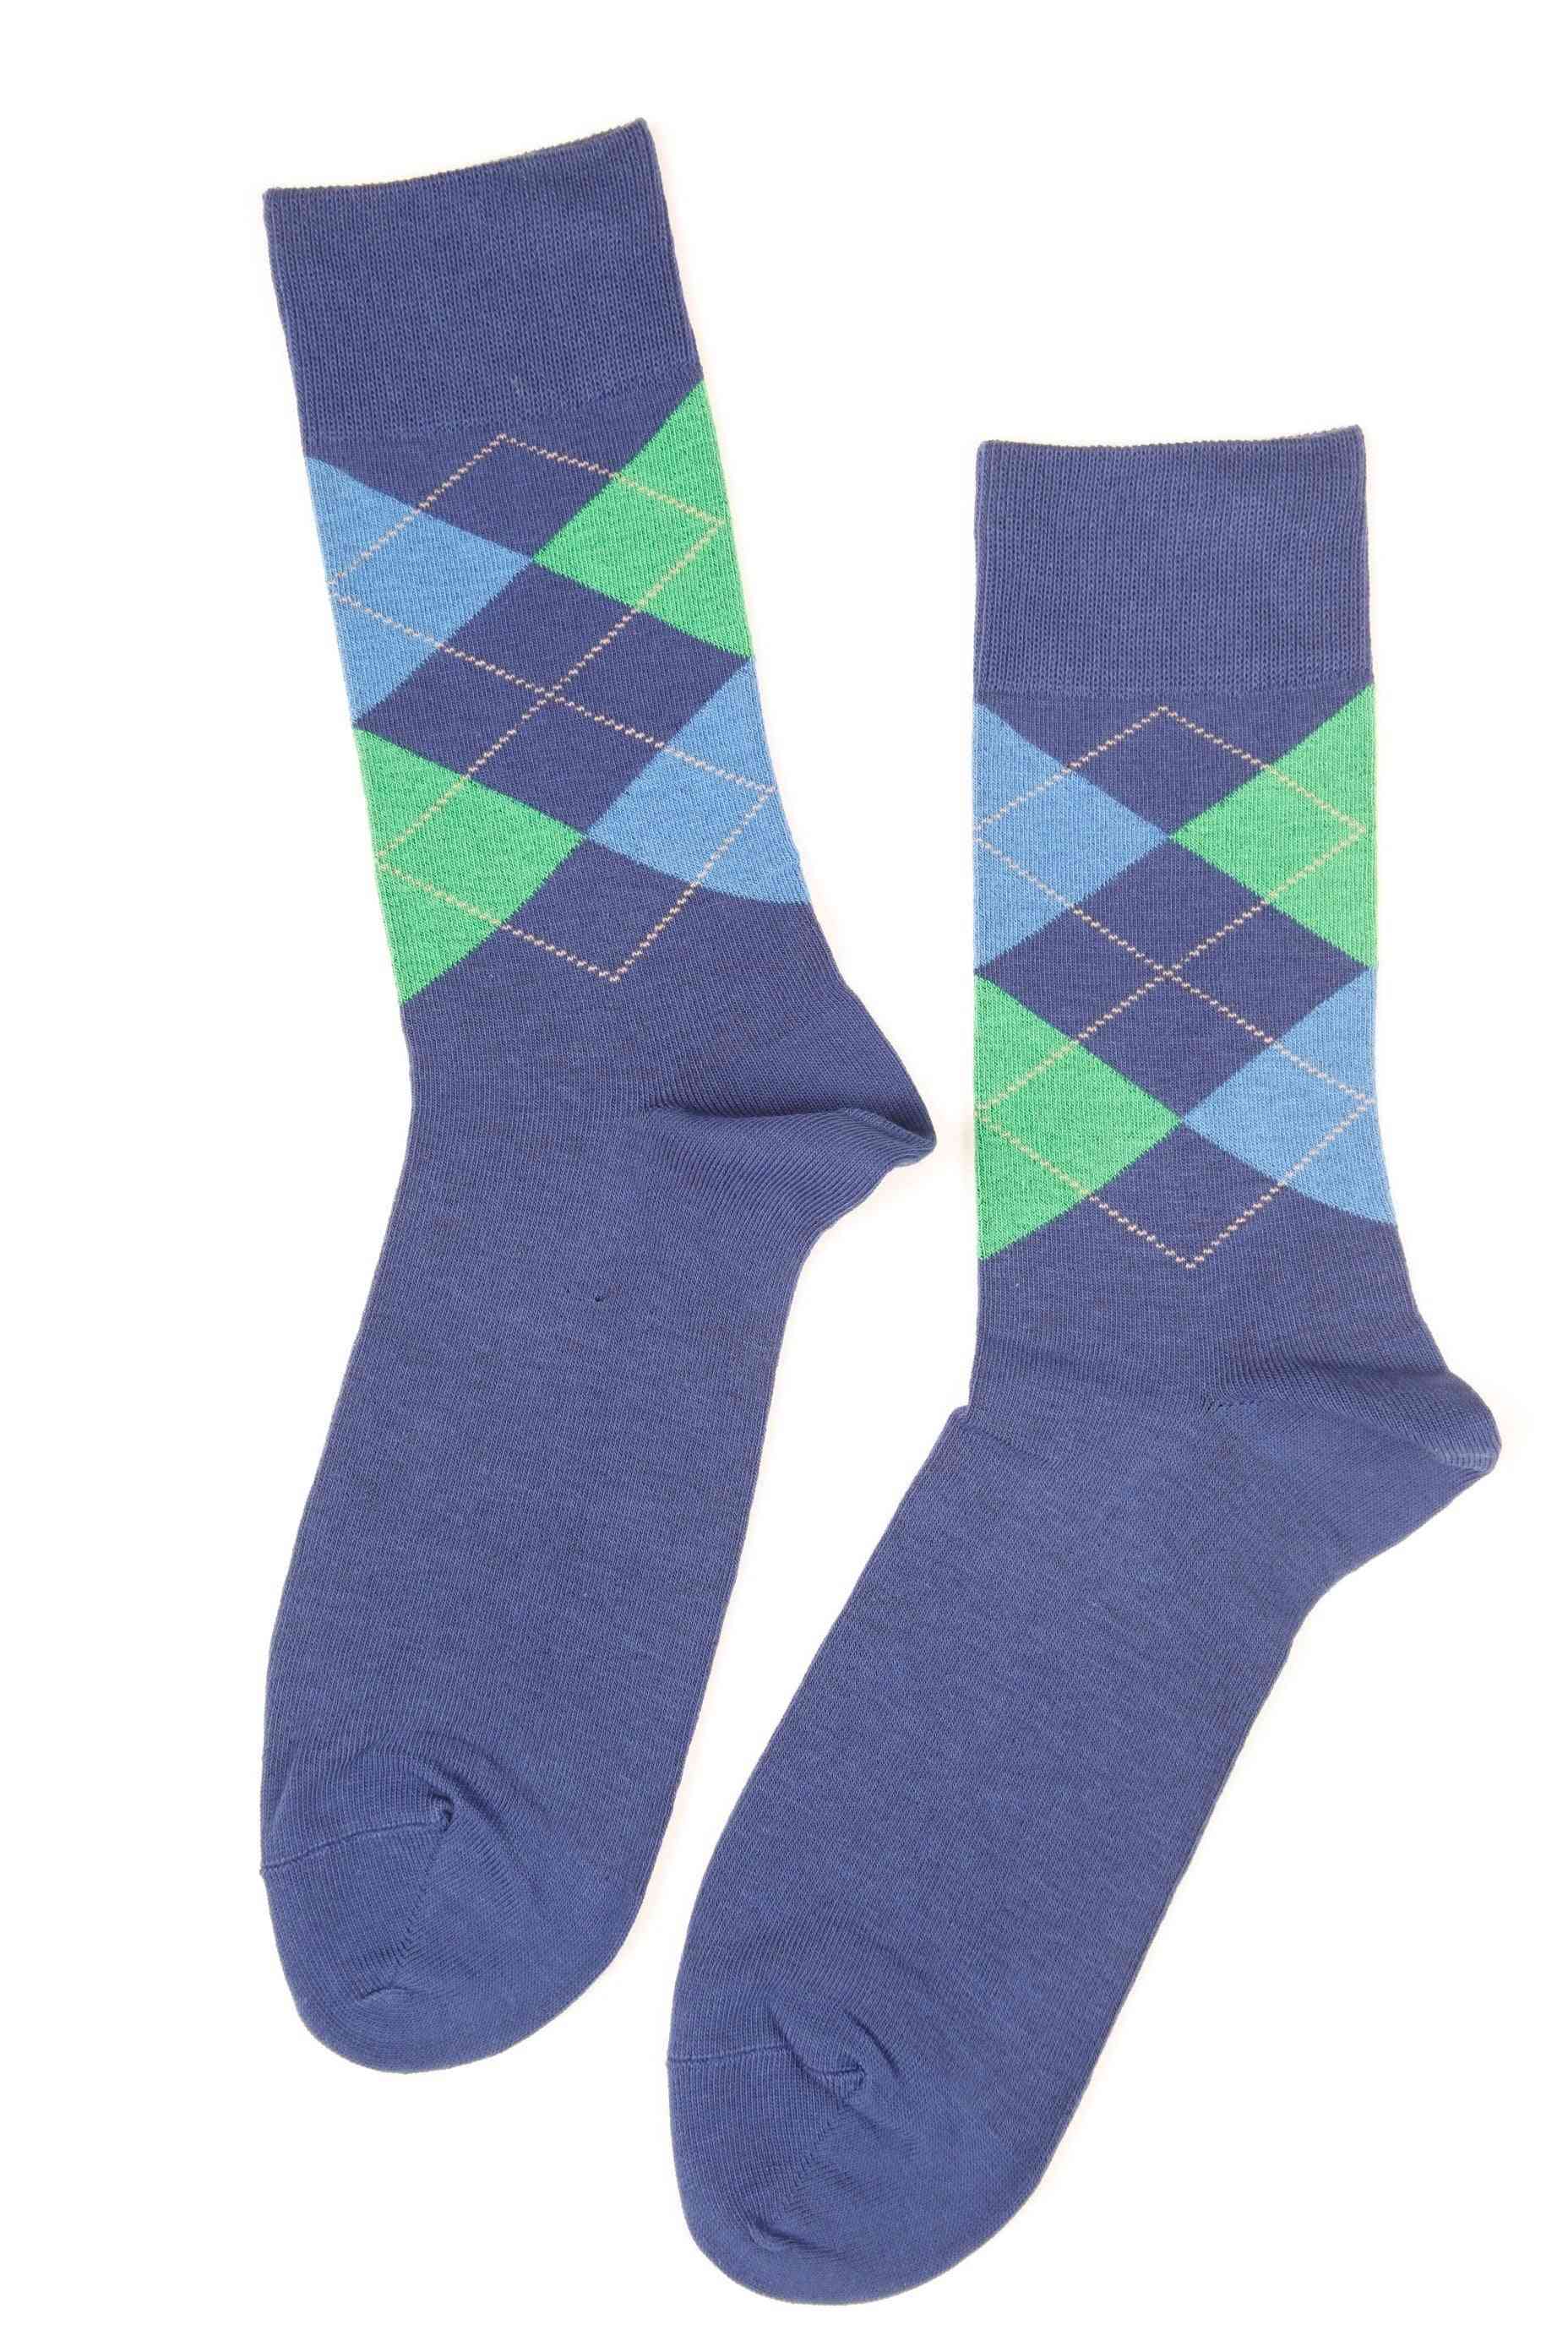 Men's Socks With Classic English Square Pattern